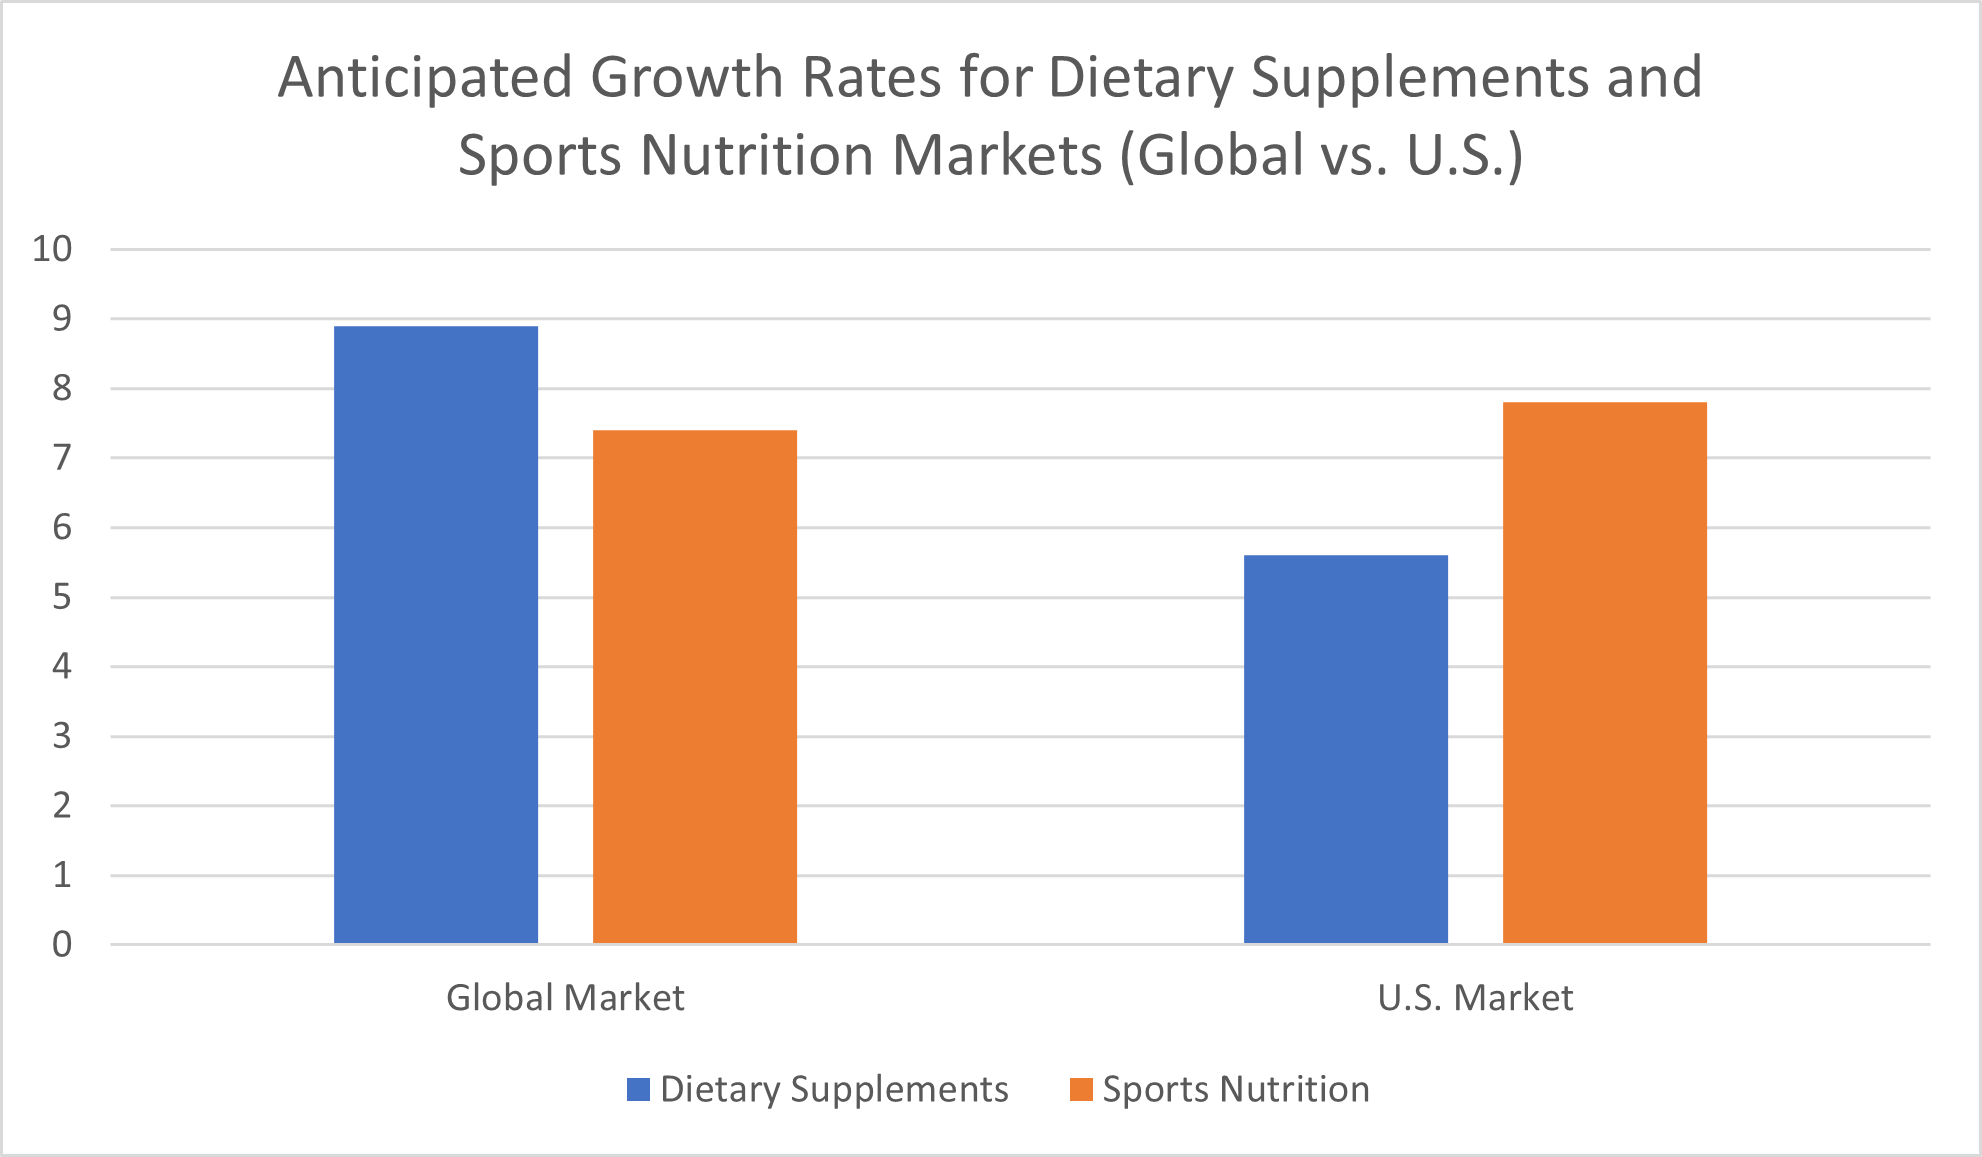 Growth rates for dietary supplements and sports nutrition markets